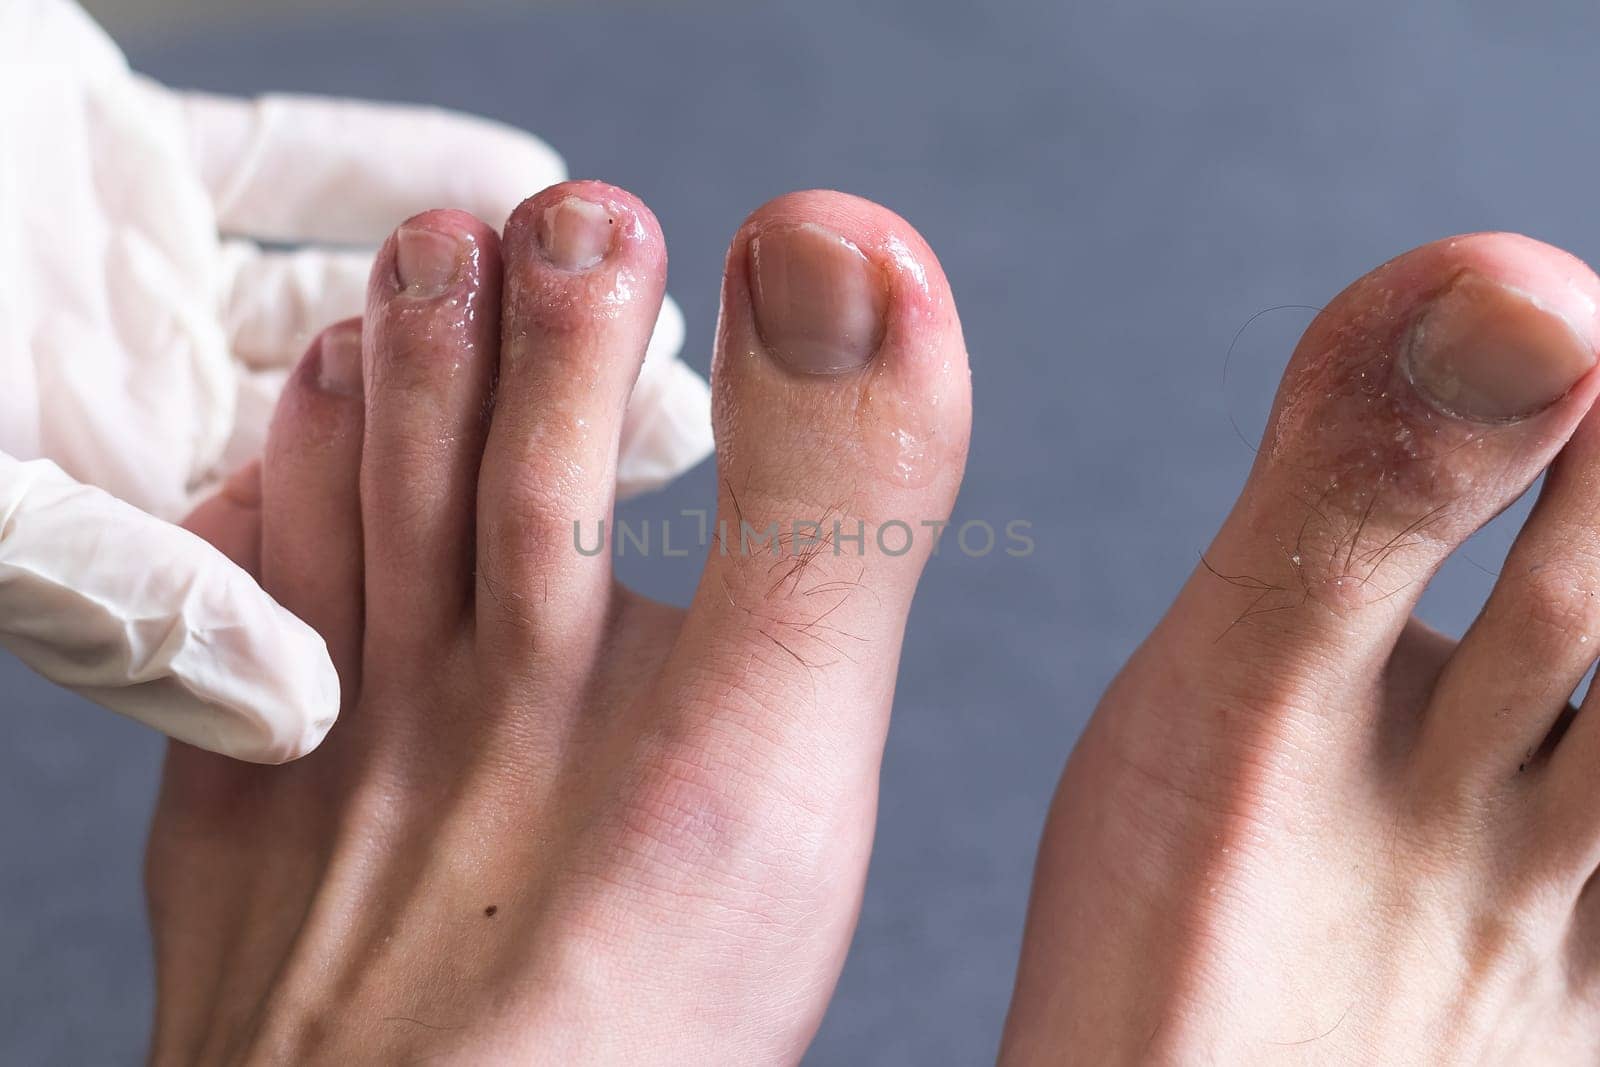 A white man holding his toes, showing what looks like a rash with red blotchy skin. A common side effect of Covid-19 often referred to as Covid toe by Andelov13